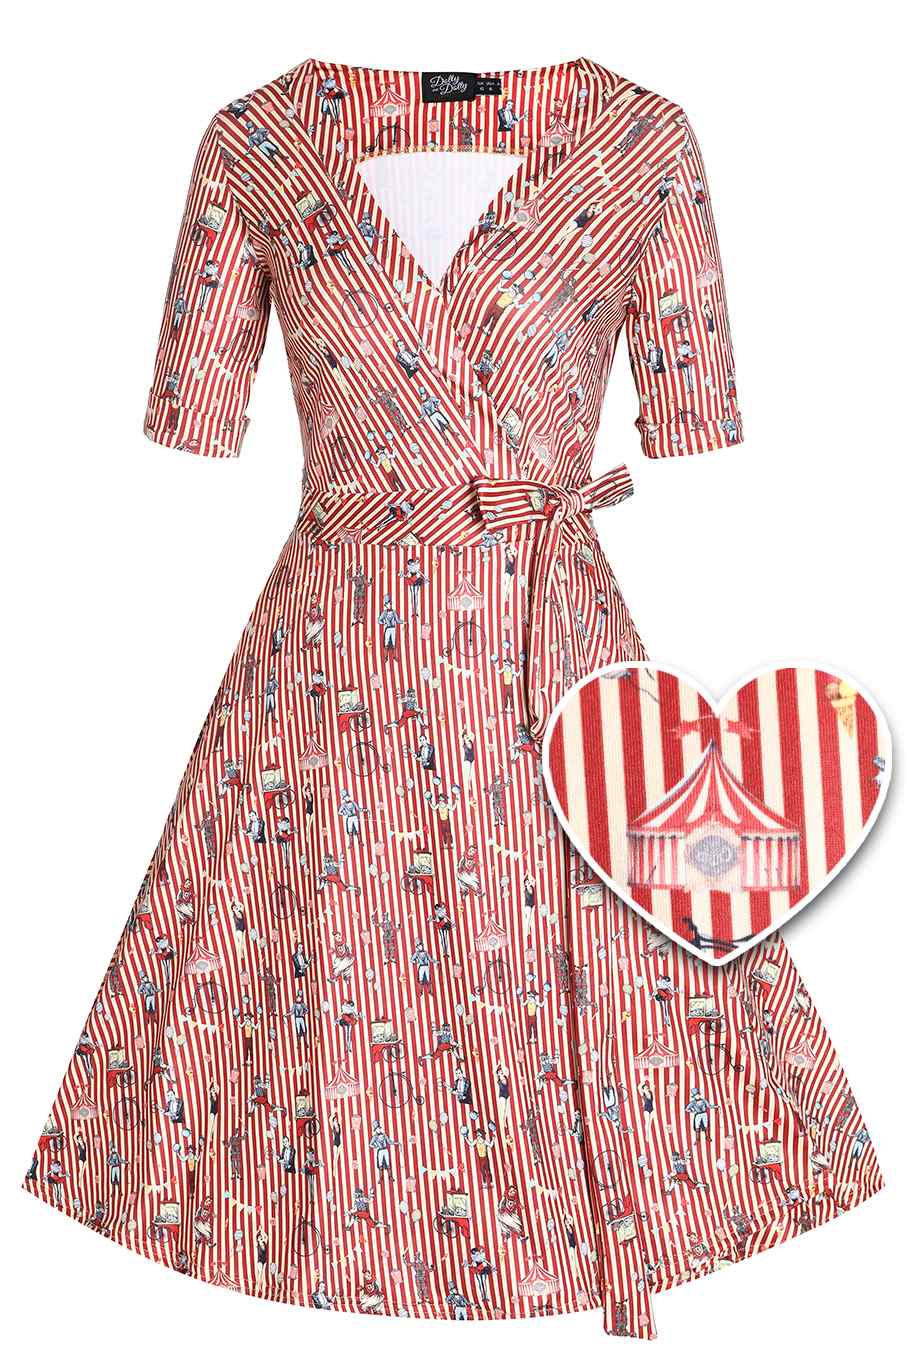 Circus Red Striped Wrap Dress